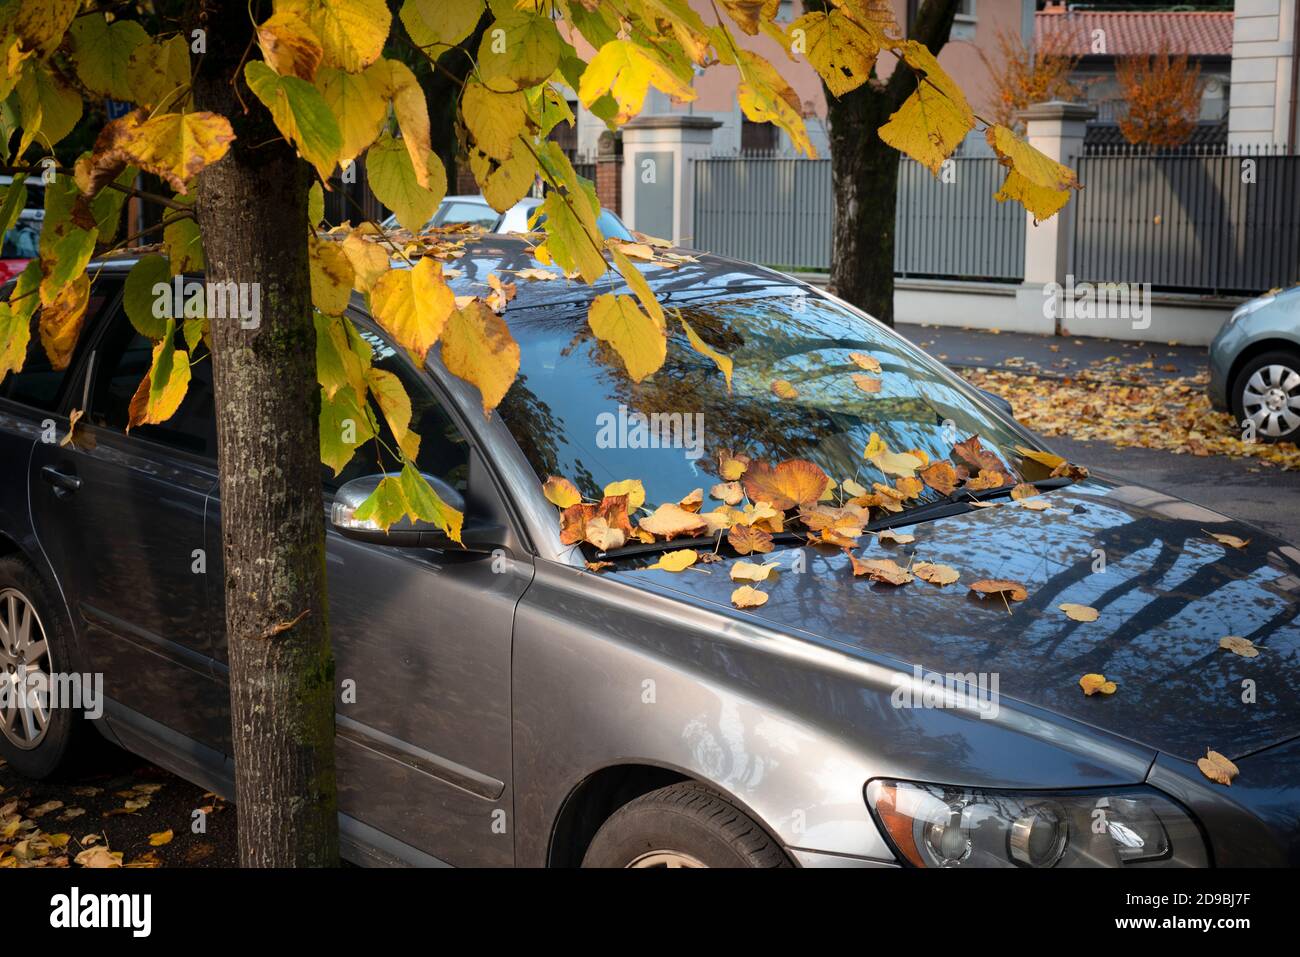 Italy, Lombardy, Car Strewn with Autumn Leaves Stock Photo